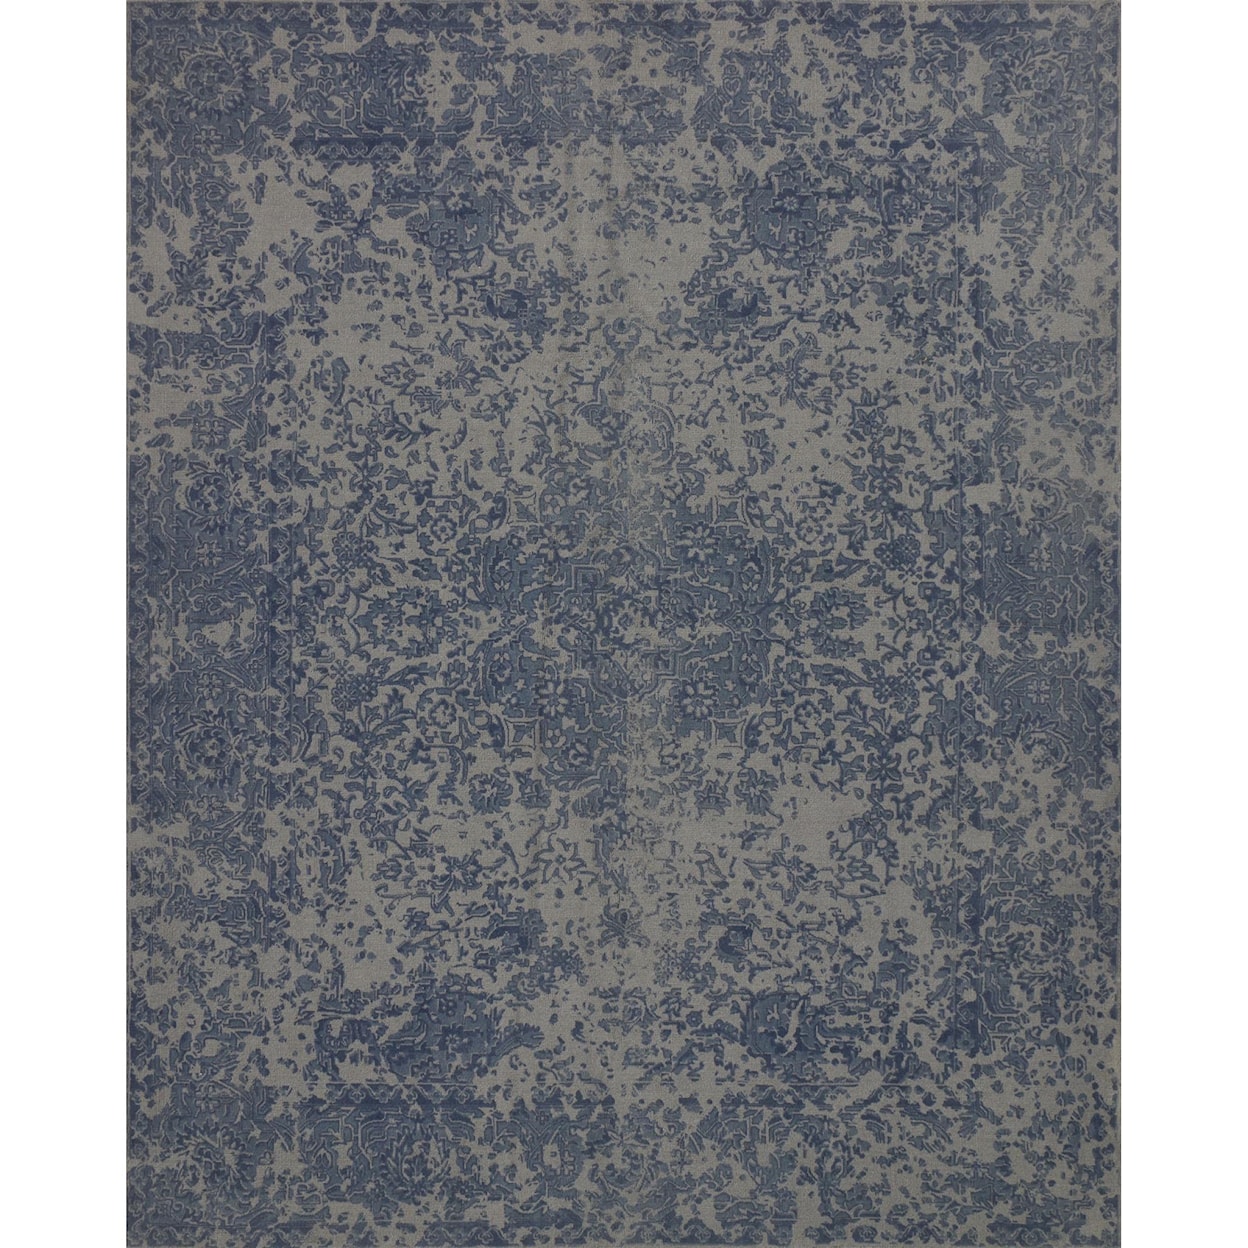 Magnolia Home by Joanna Gaines for Loloi Lily Park 7' 9" x 9' 9" Rectangle Rug